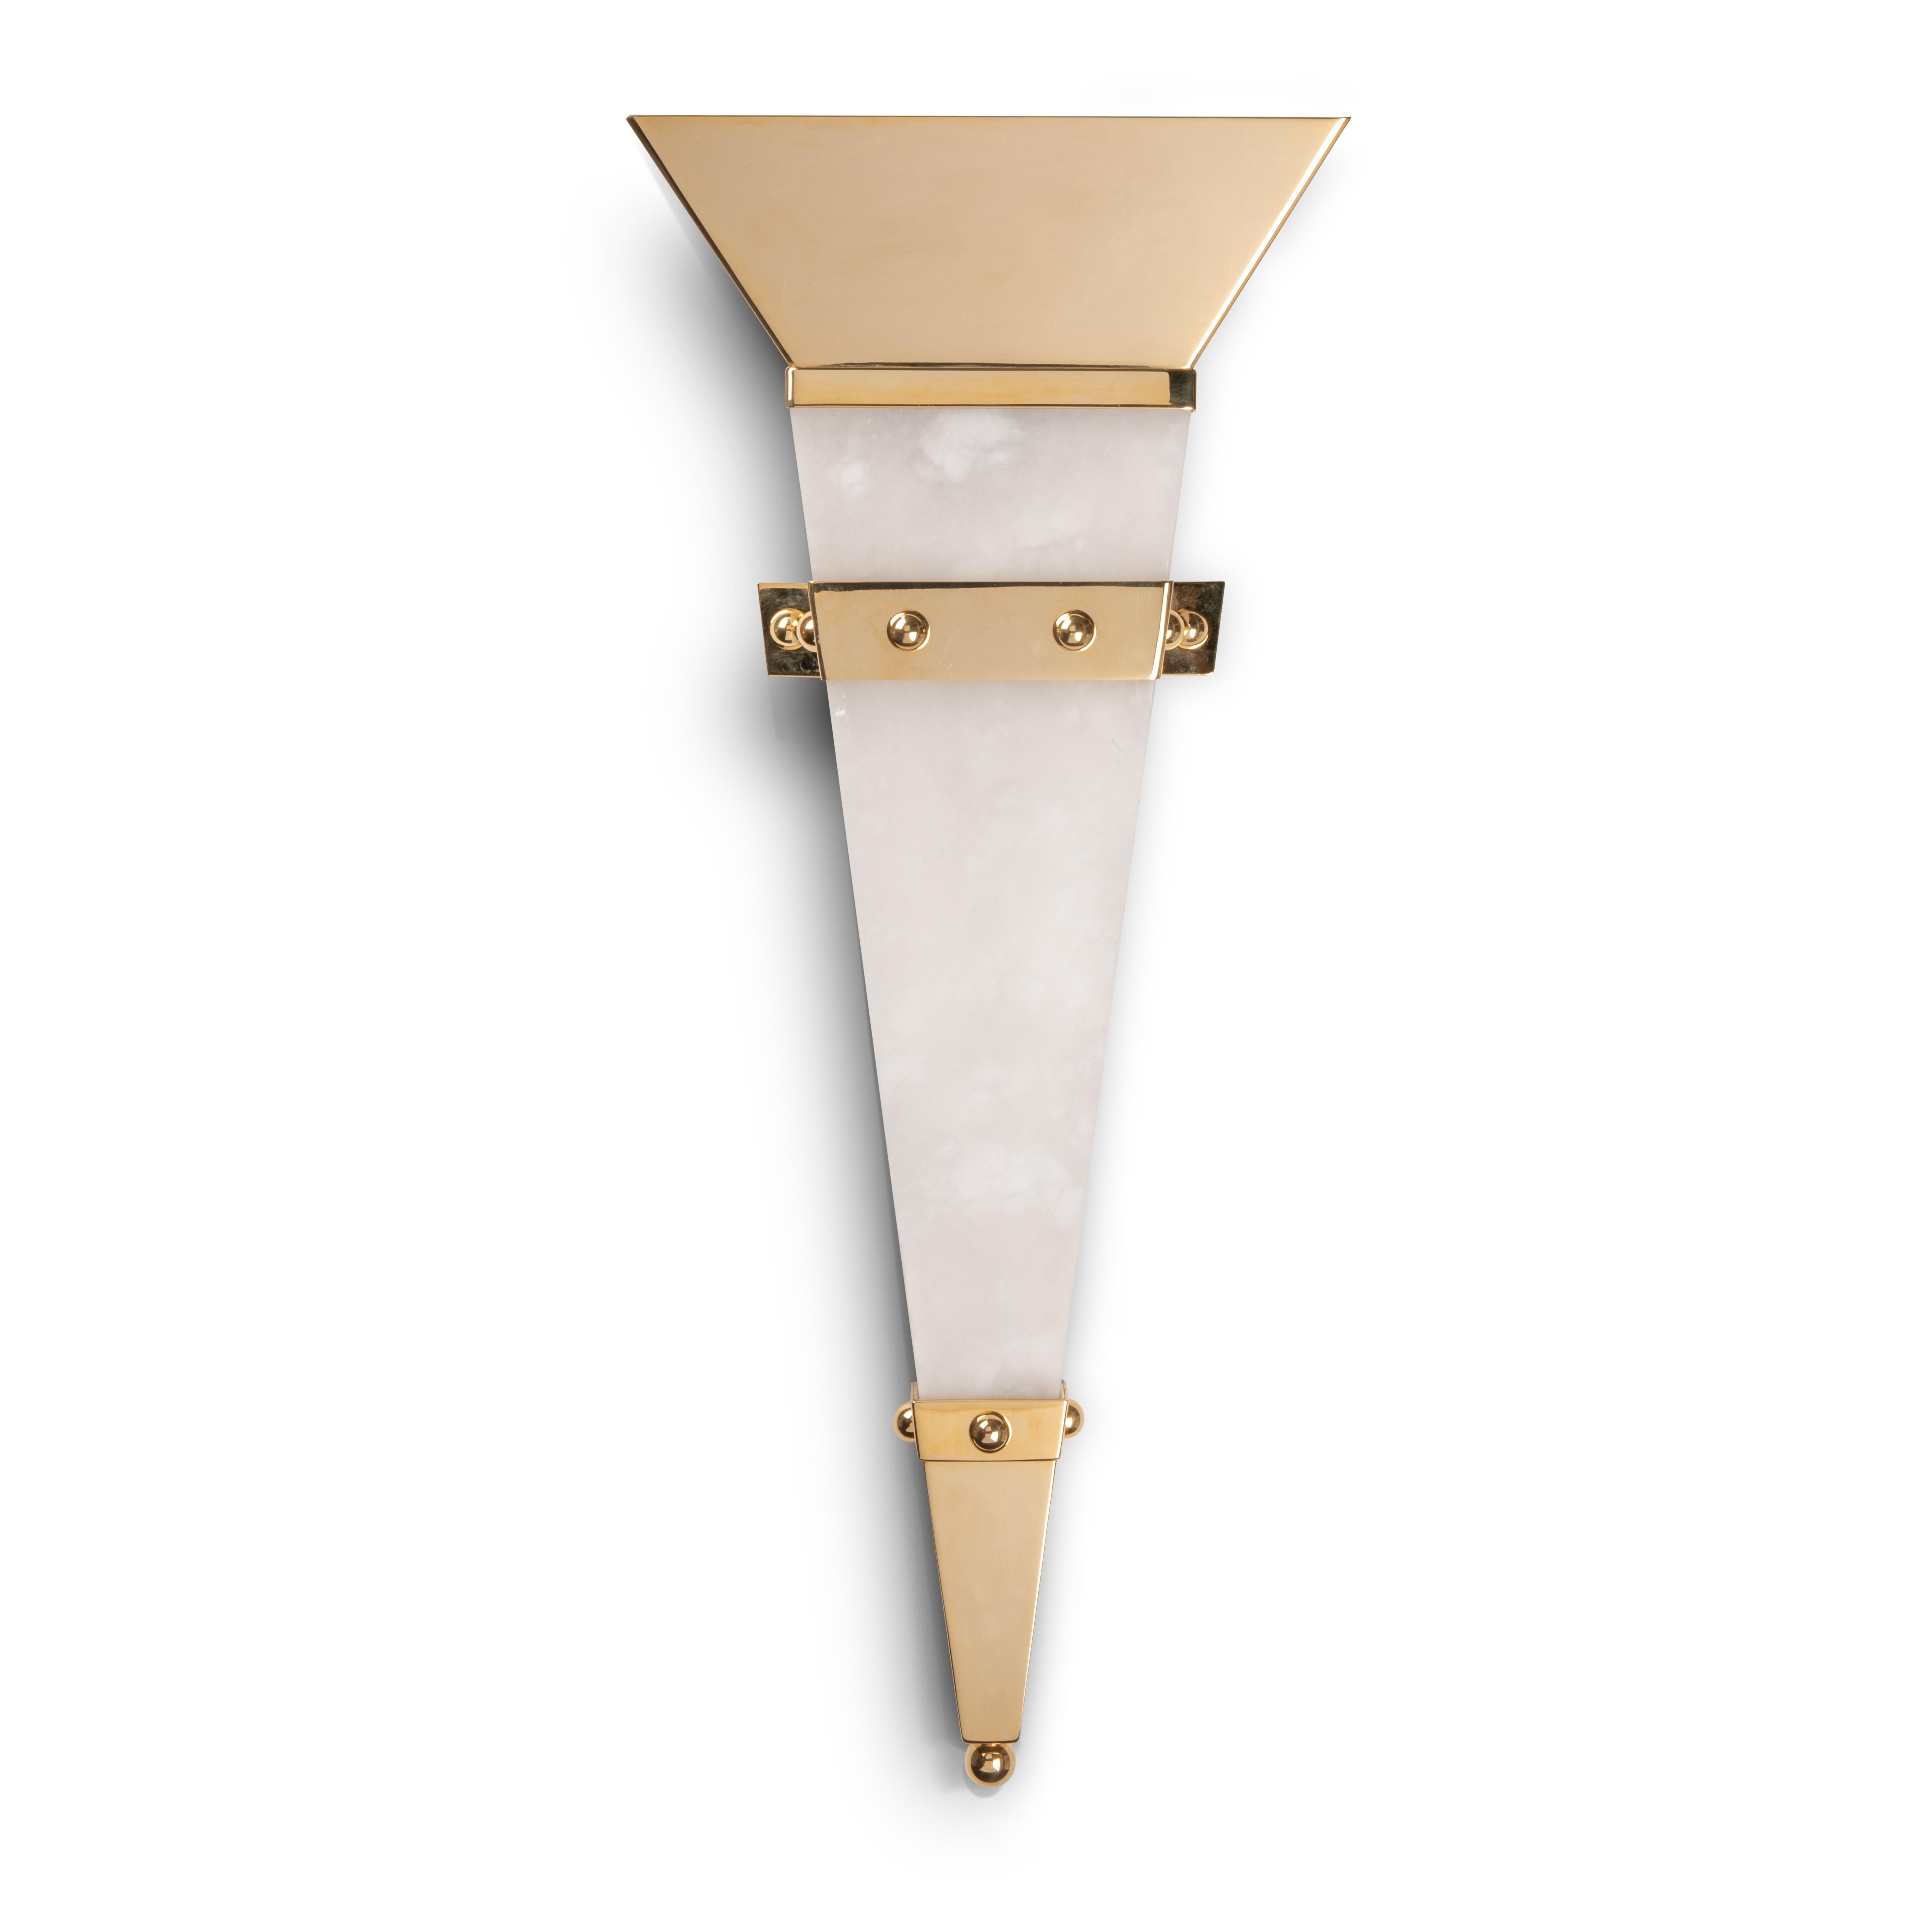 Alabaster, brass and gilded gold wall lamp designed and produced by Christian Caudron, Meilleur Ouvrier de France 2015*, in his Parisian workshop.

This sconce, part of the Bridge Collection, is inspired by the arches of the bridges of